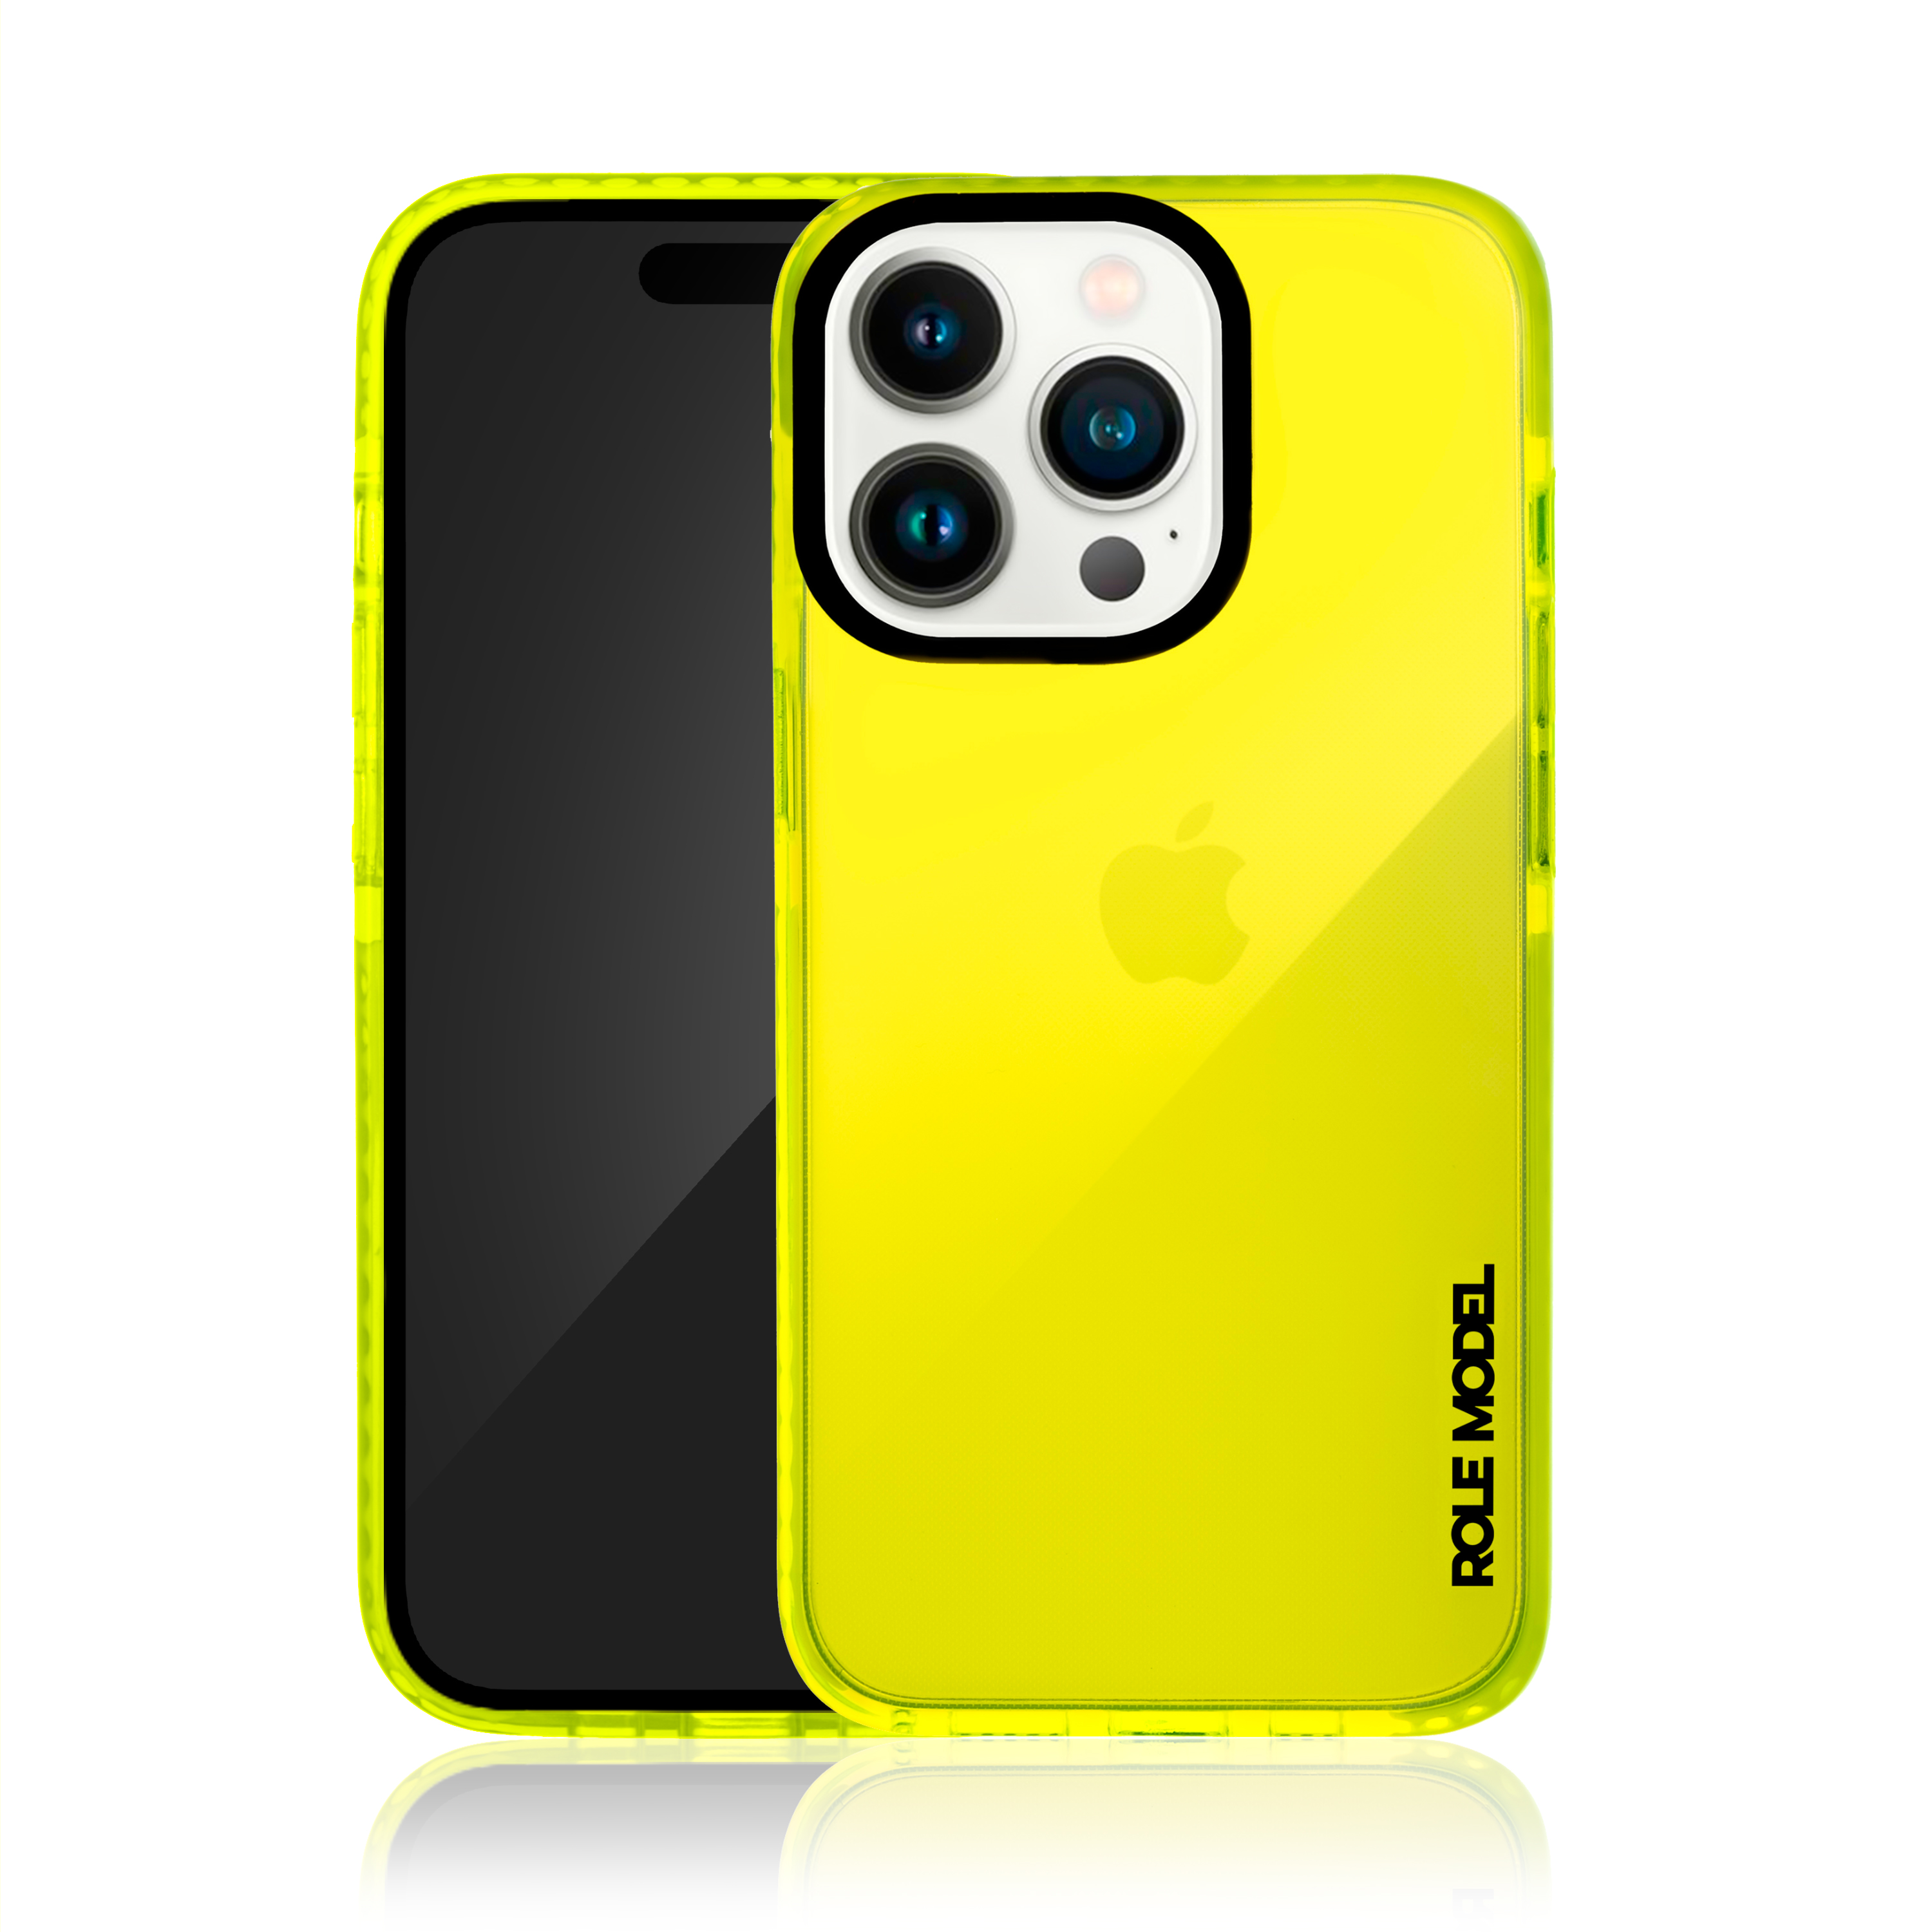 Cybercase, ROLE Cyberyellow MODEL Pro Backcover, 14 Apple, Max, iPhone